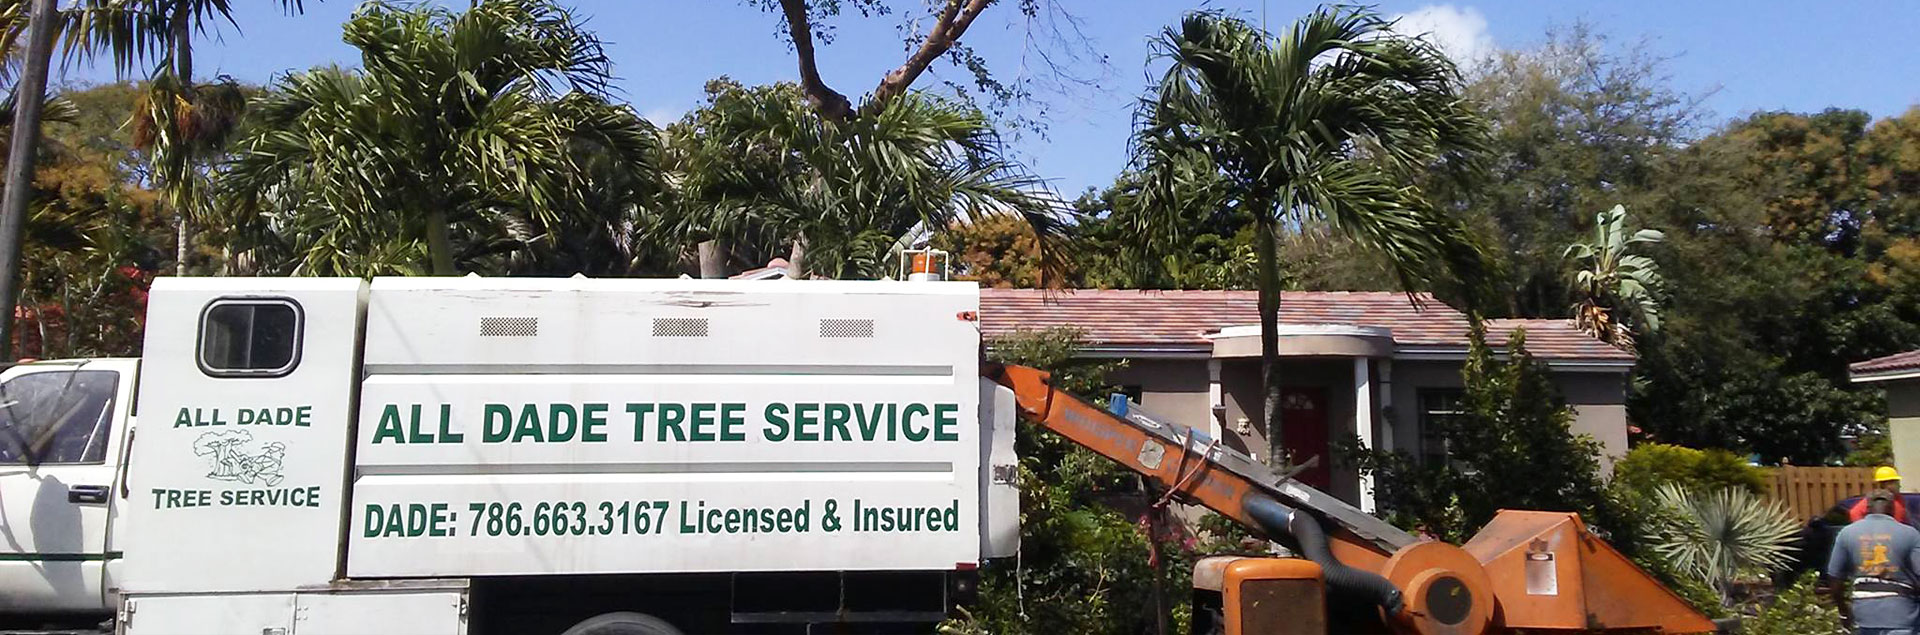 Tree Removal Services, Tree Services